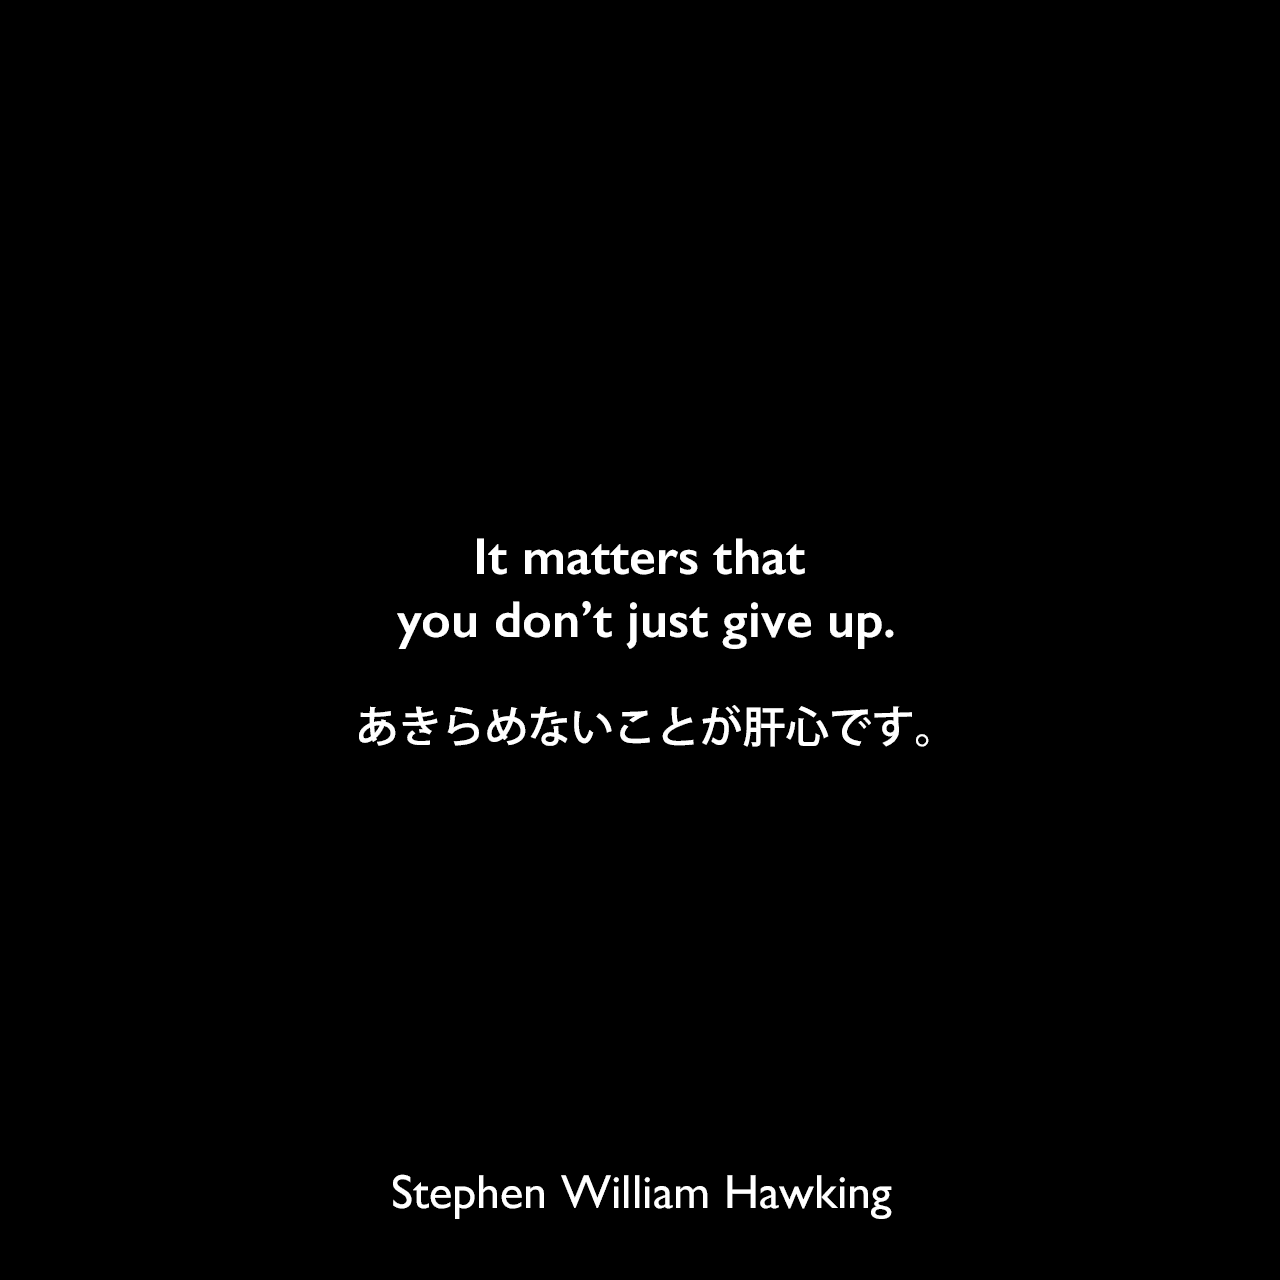 It matters that you don’t just give up.あきらめないことが肝心です。Stephen William Hawking